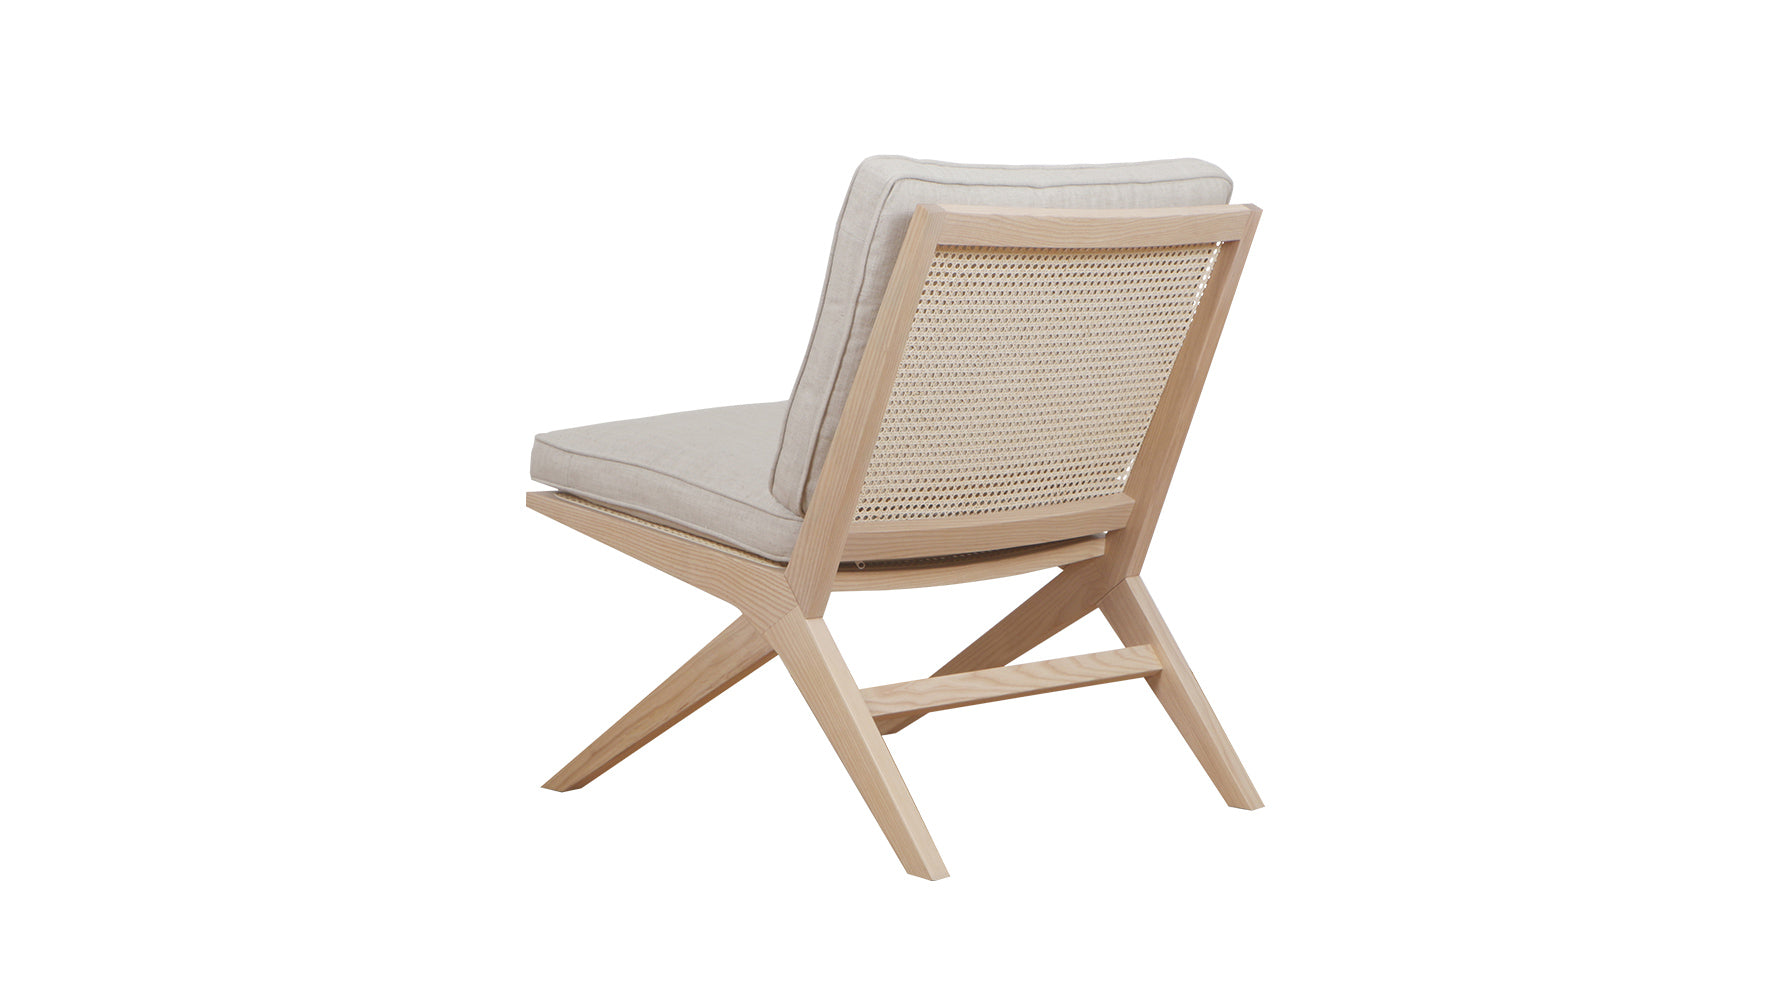 Endless Summer Lounge Chair with Cushion, White Ash/Natural Fabric - Image 7